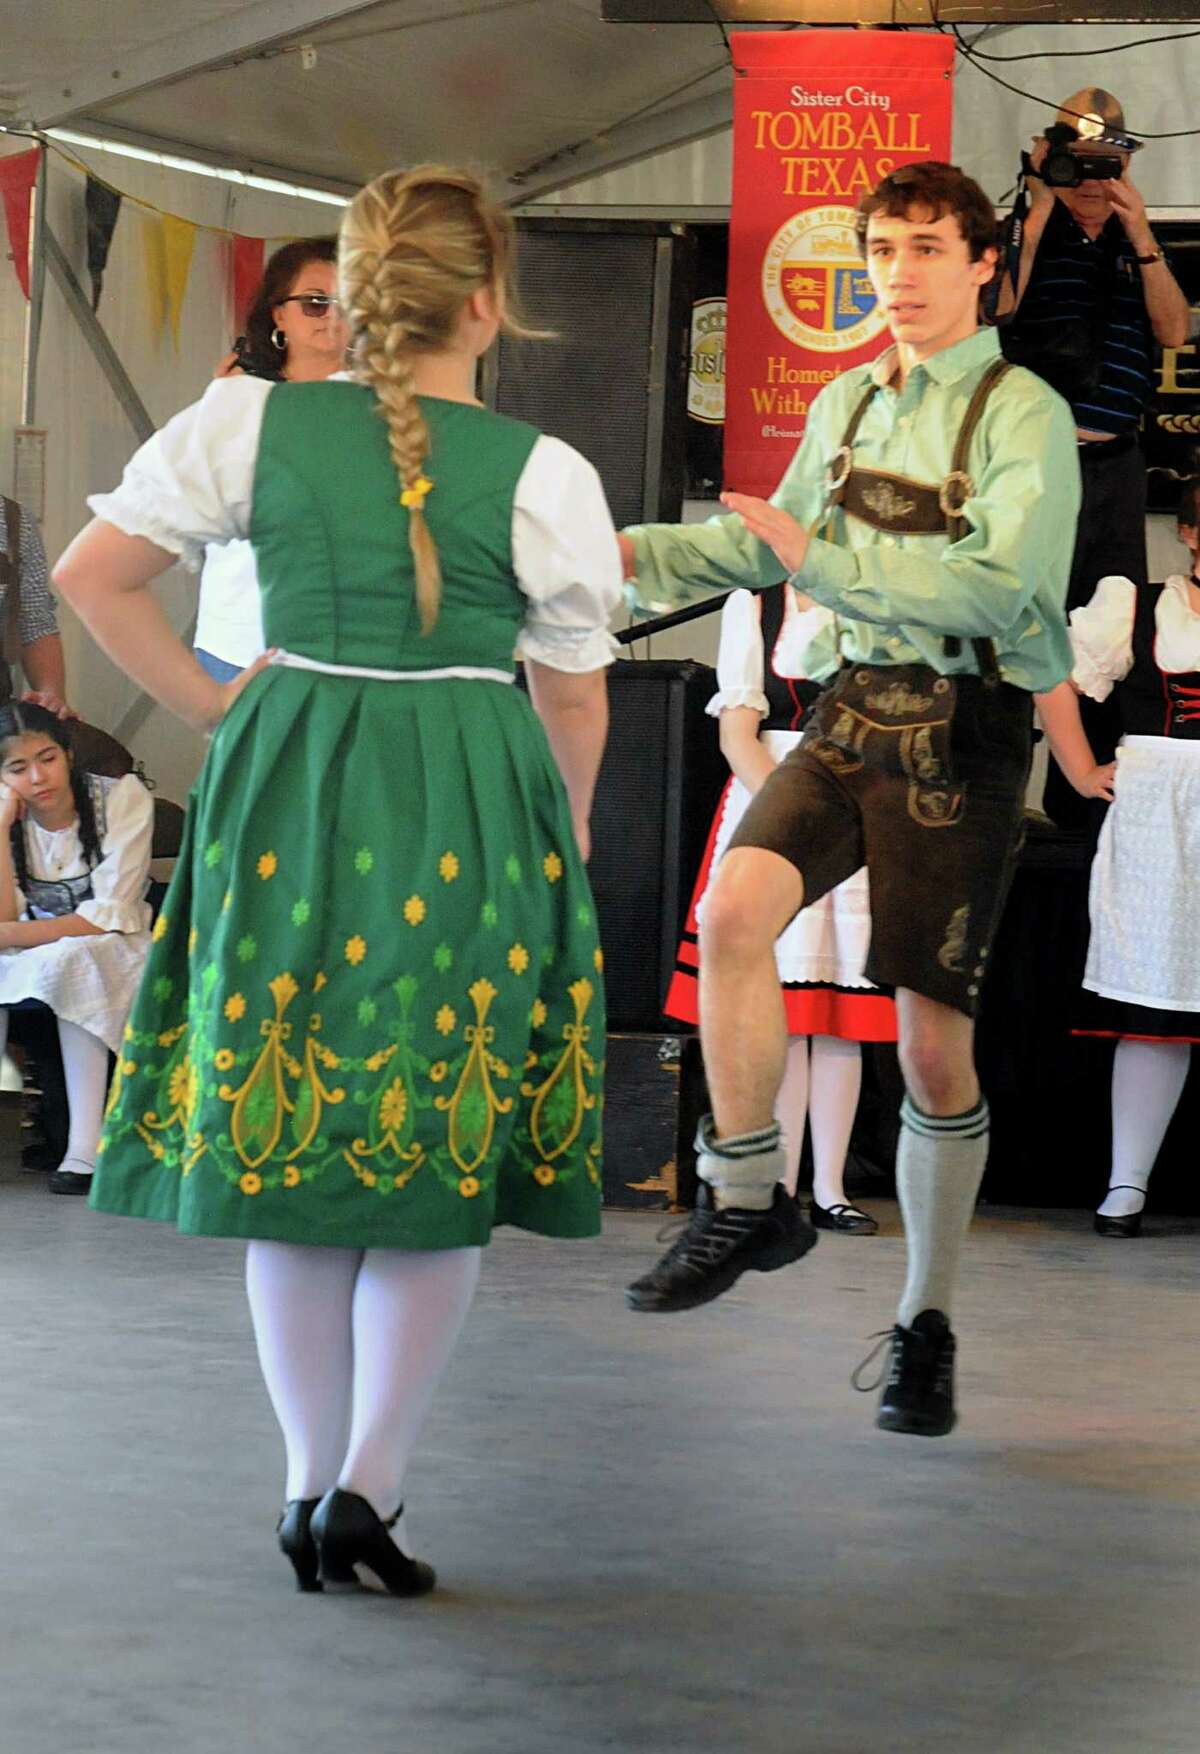 Scenes from Tomball's annual German Festival